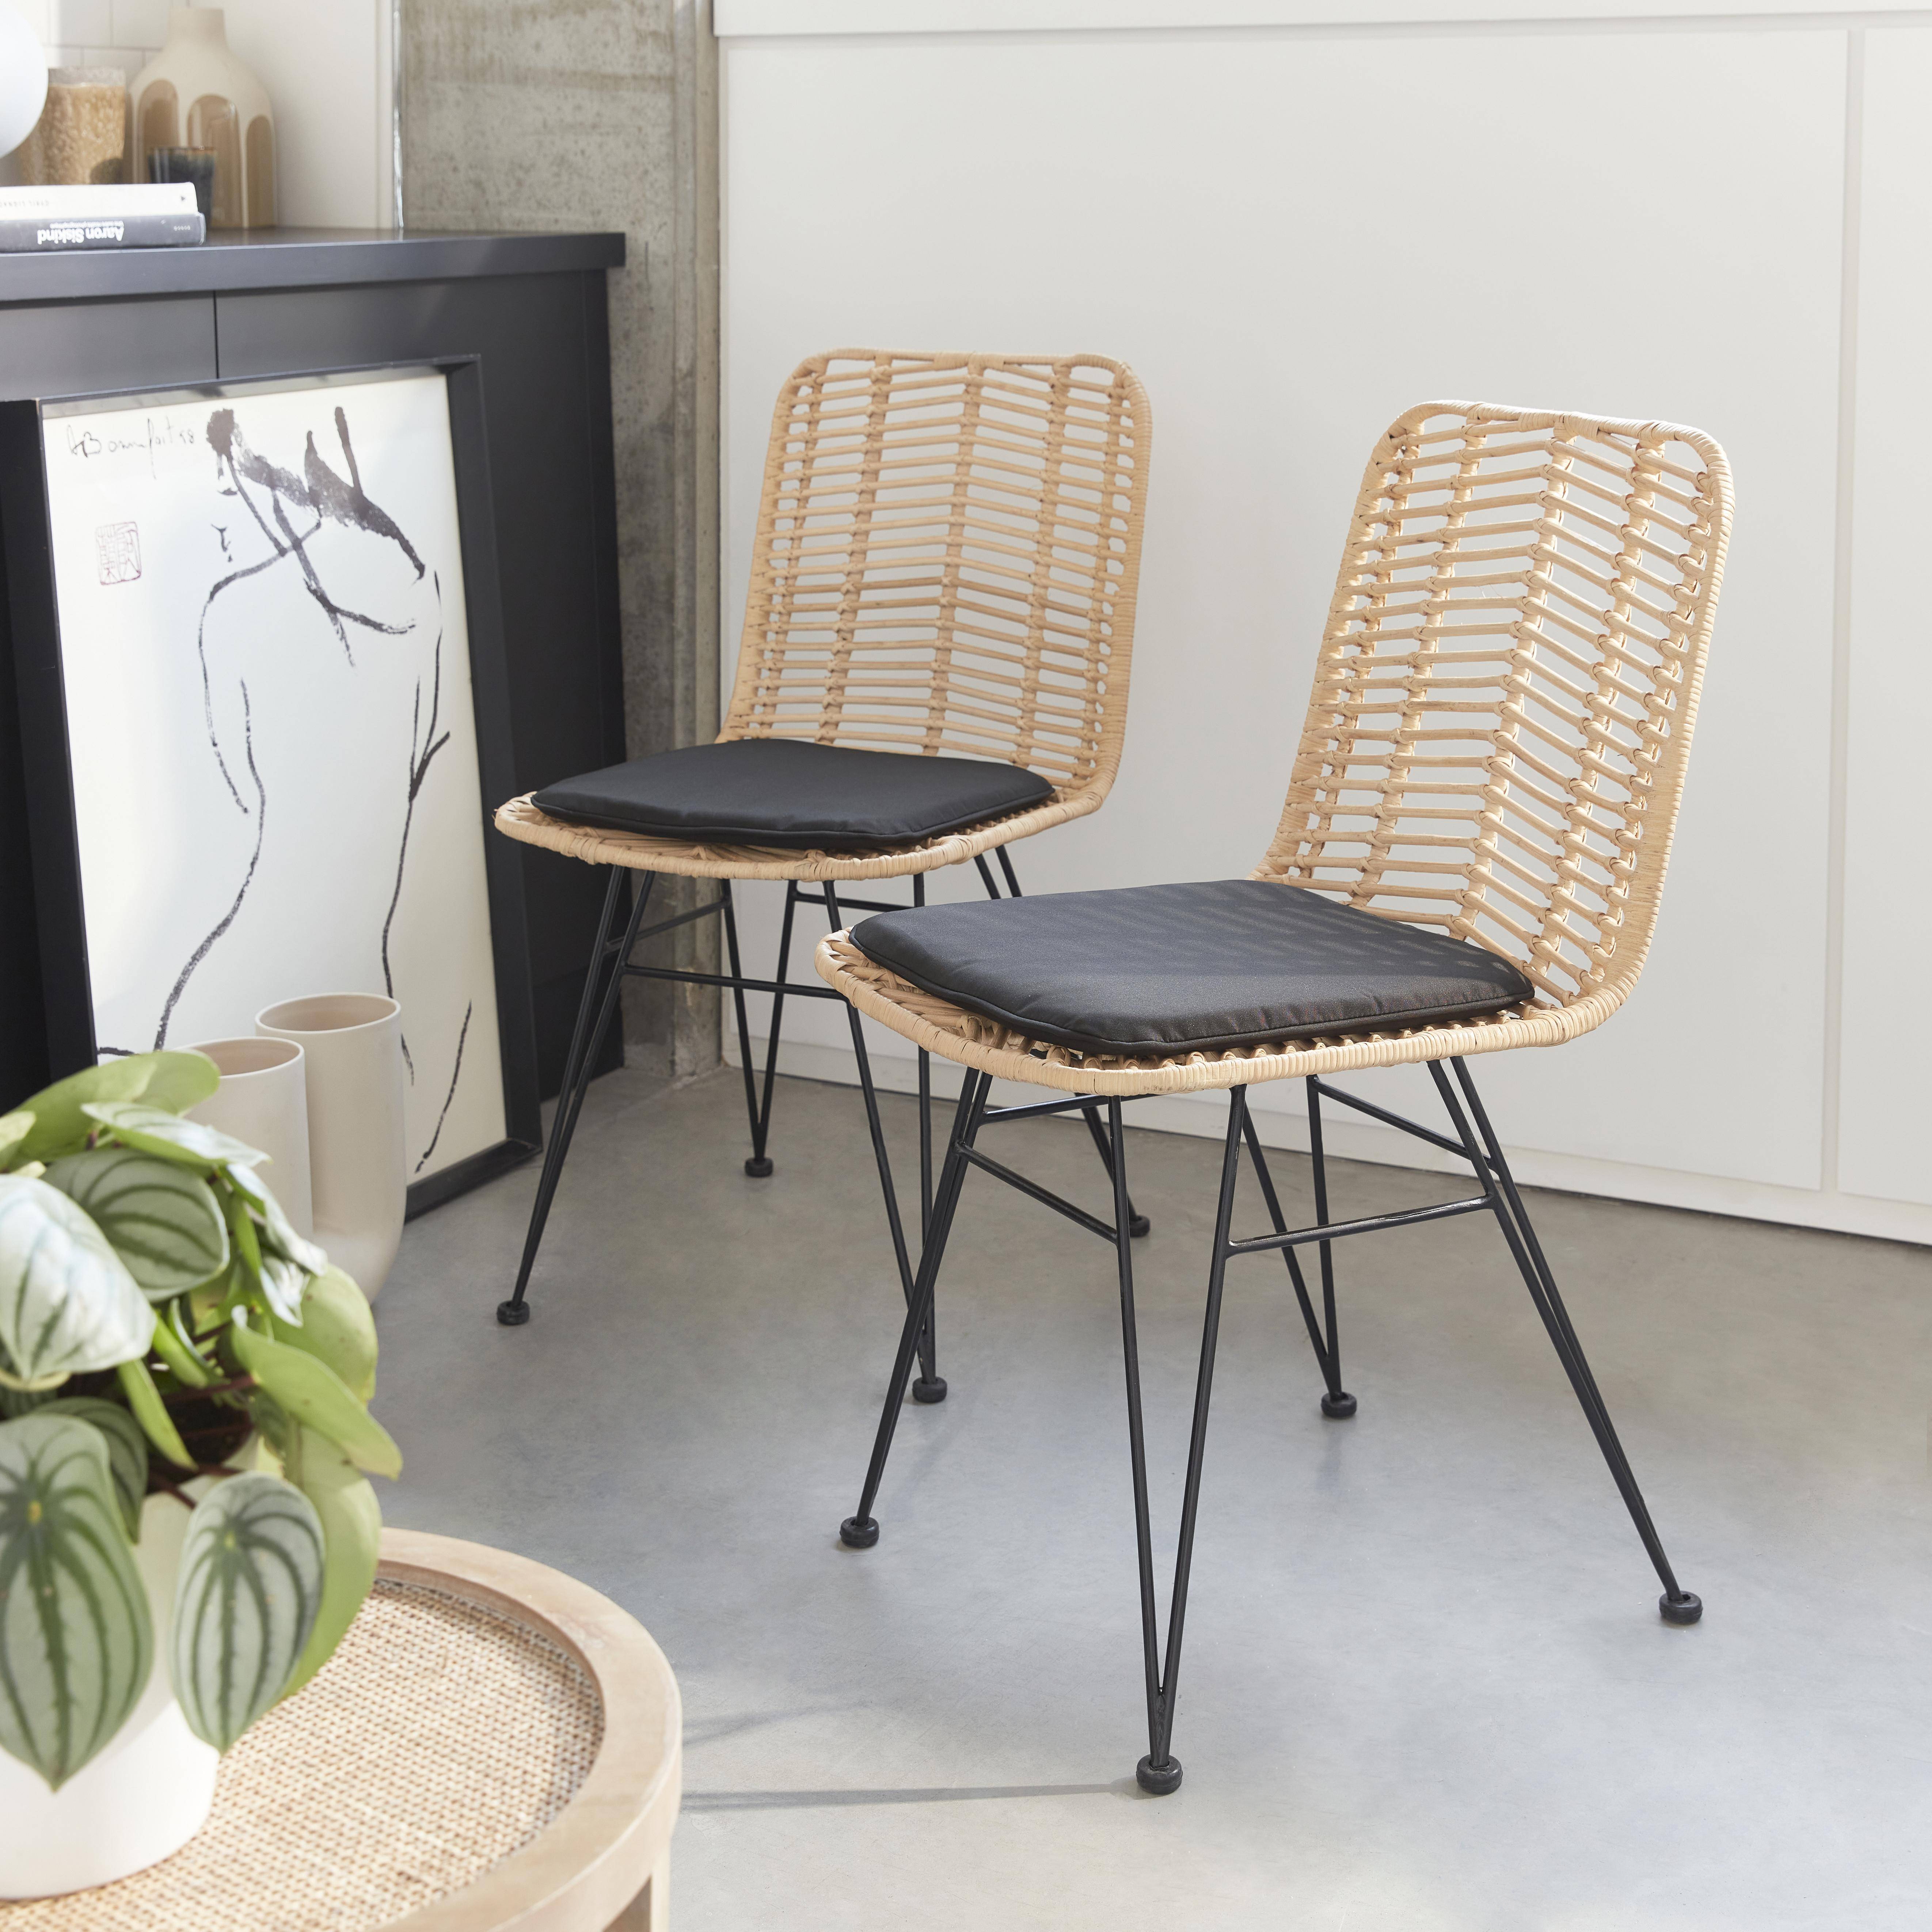 Pair of high-backed rattan dining chairs with metal legs and cushions - Cahya - Natural rattan, Black cushions,sweeek,Photo1